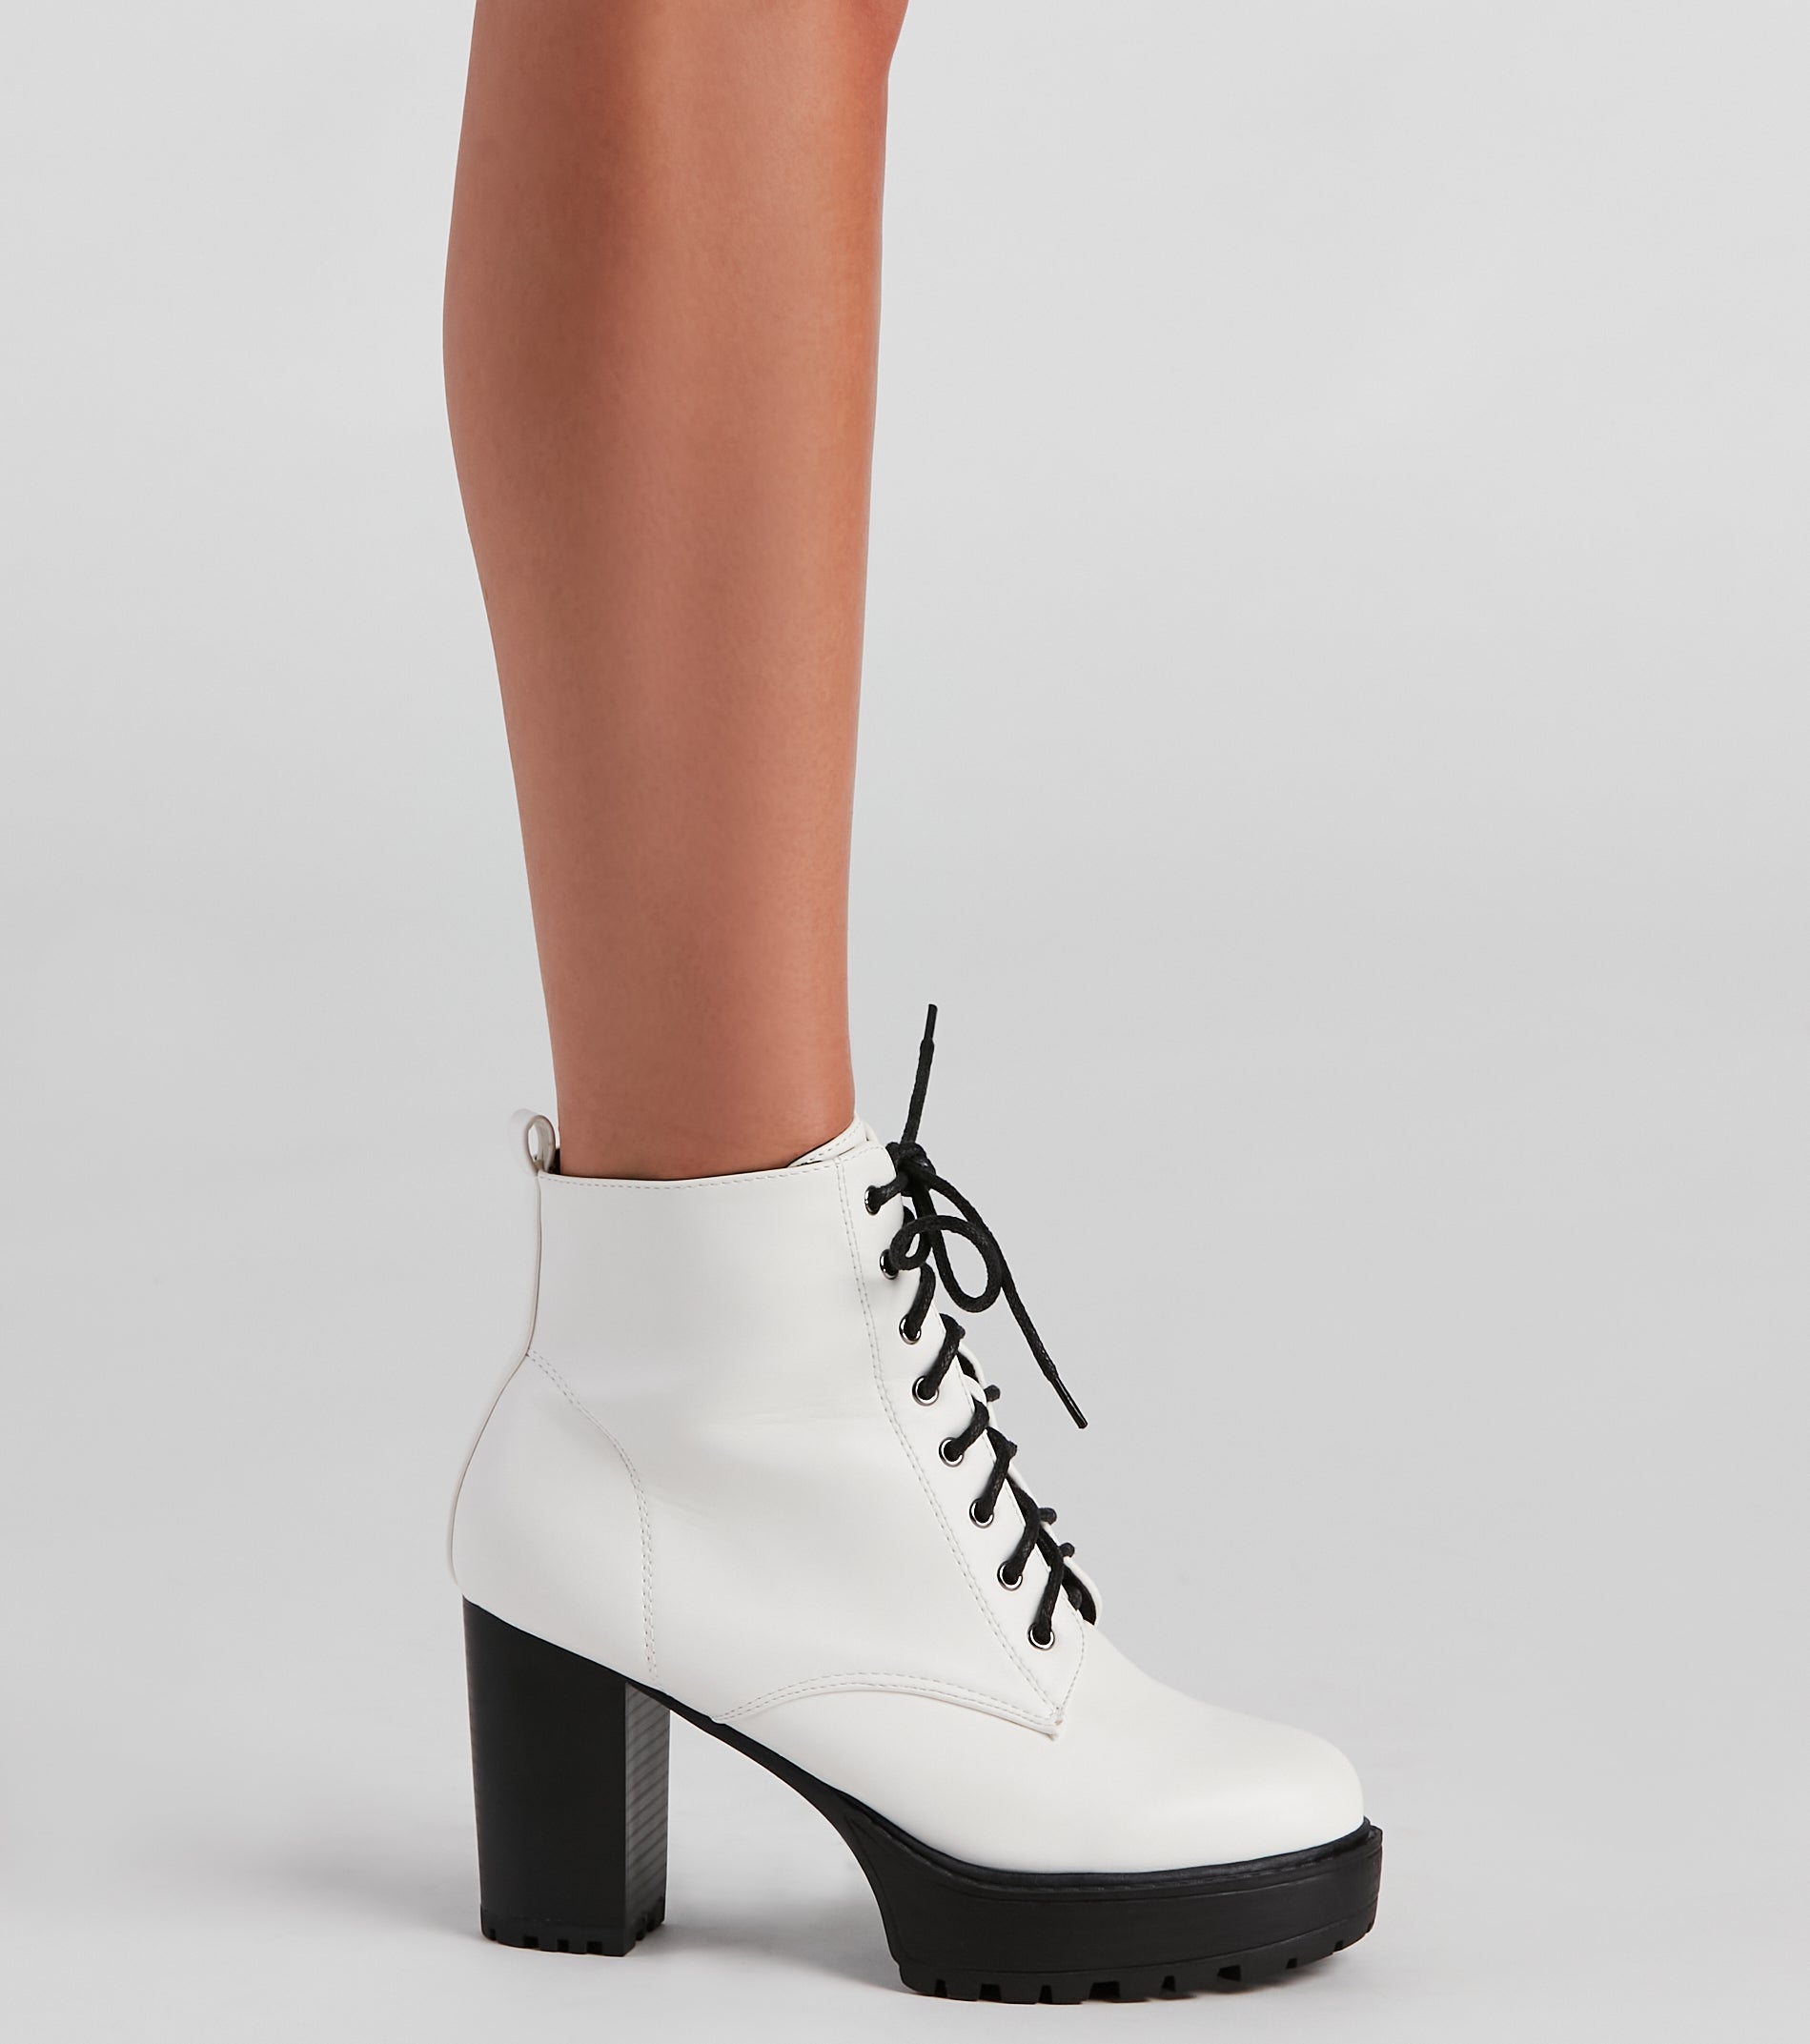 Edgy Babe Platform Lace-Up Booties